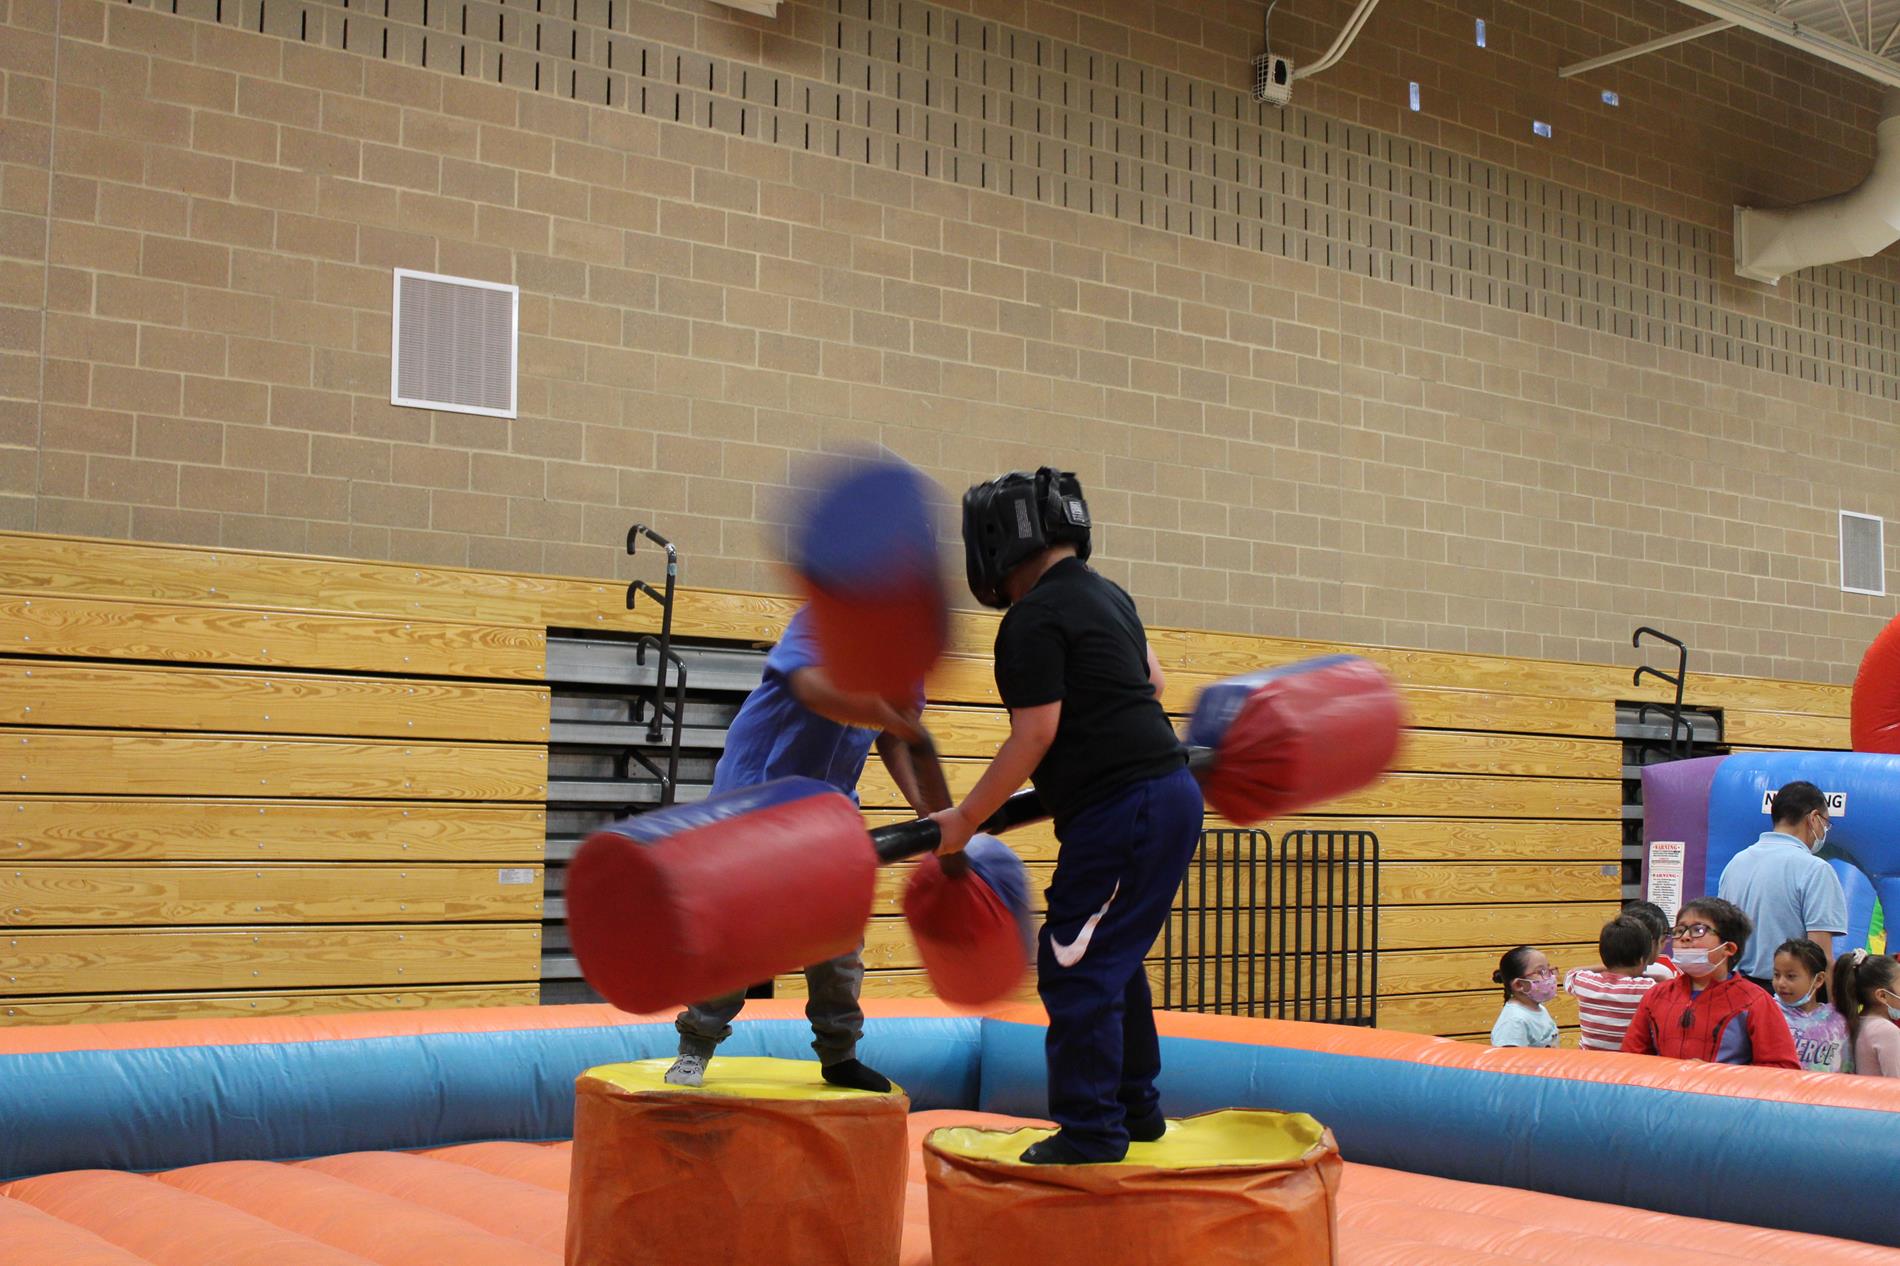 2 students jousting